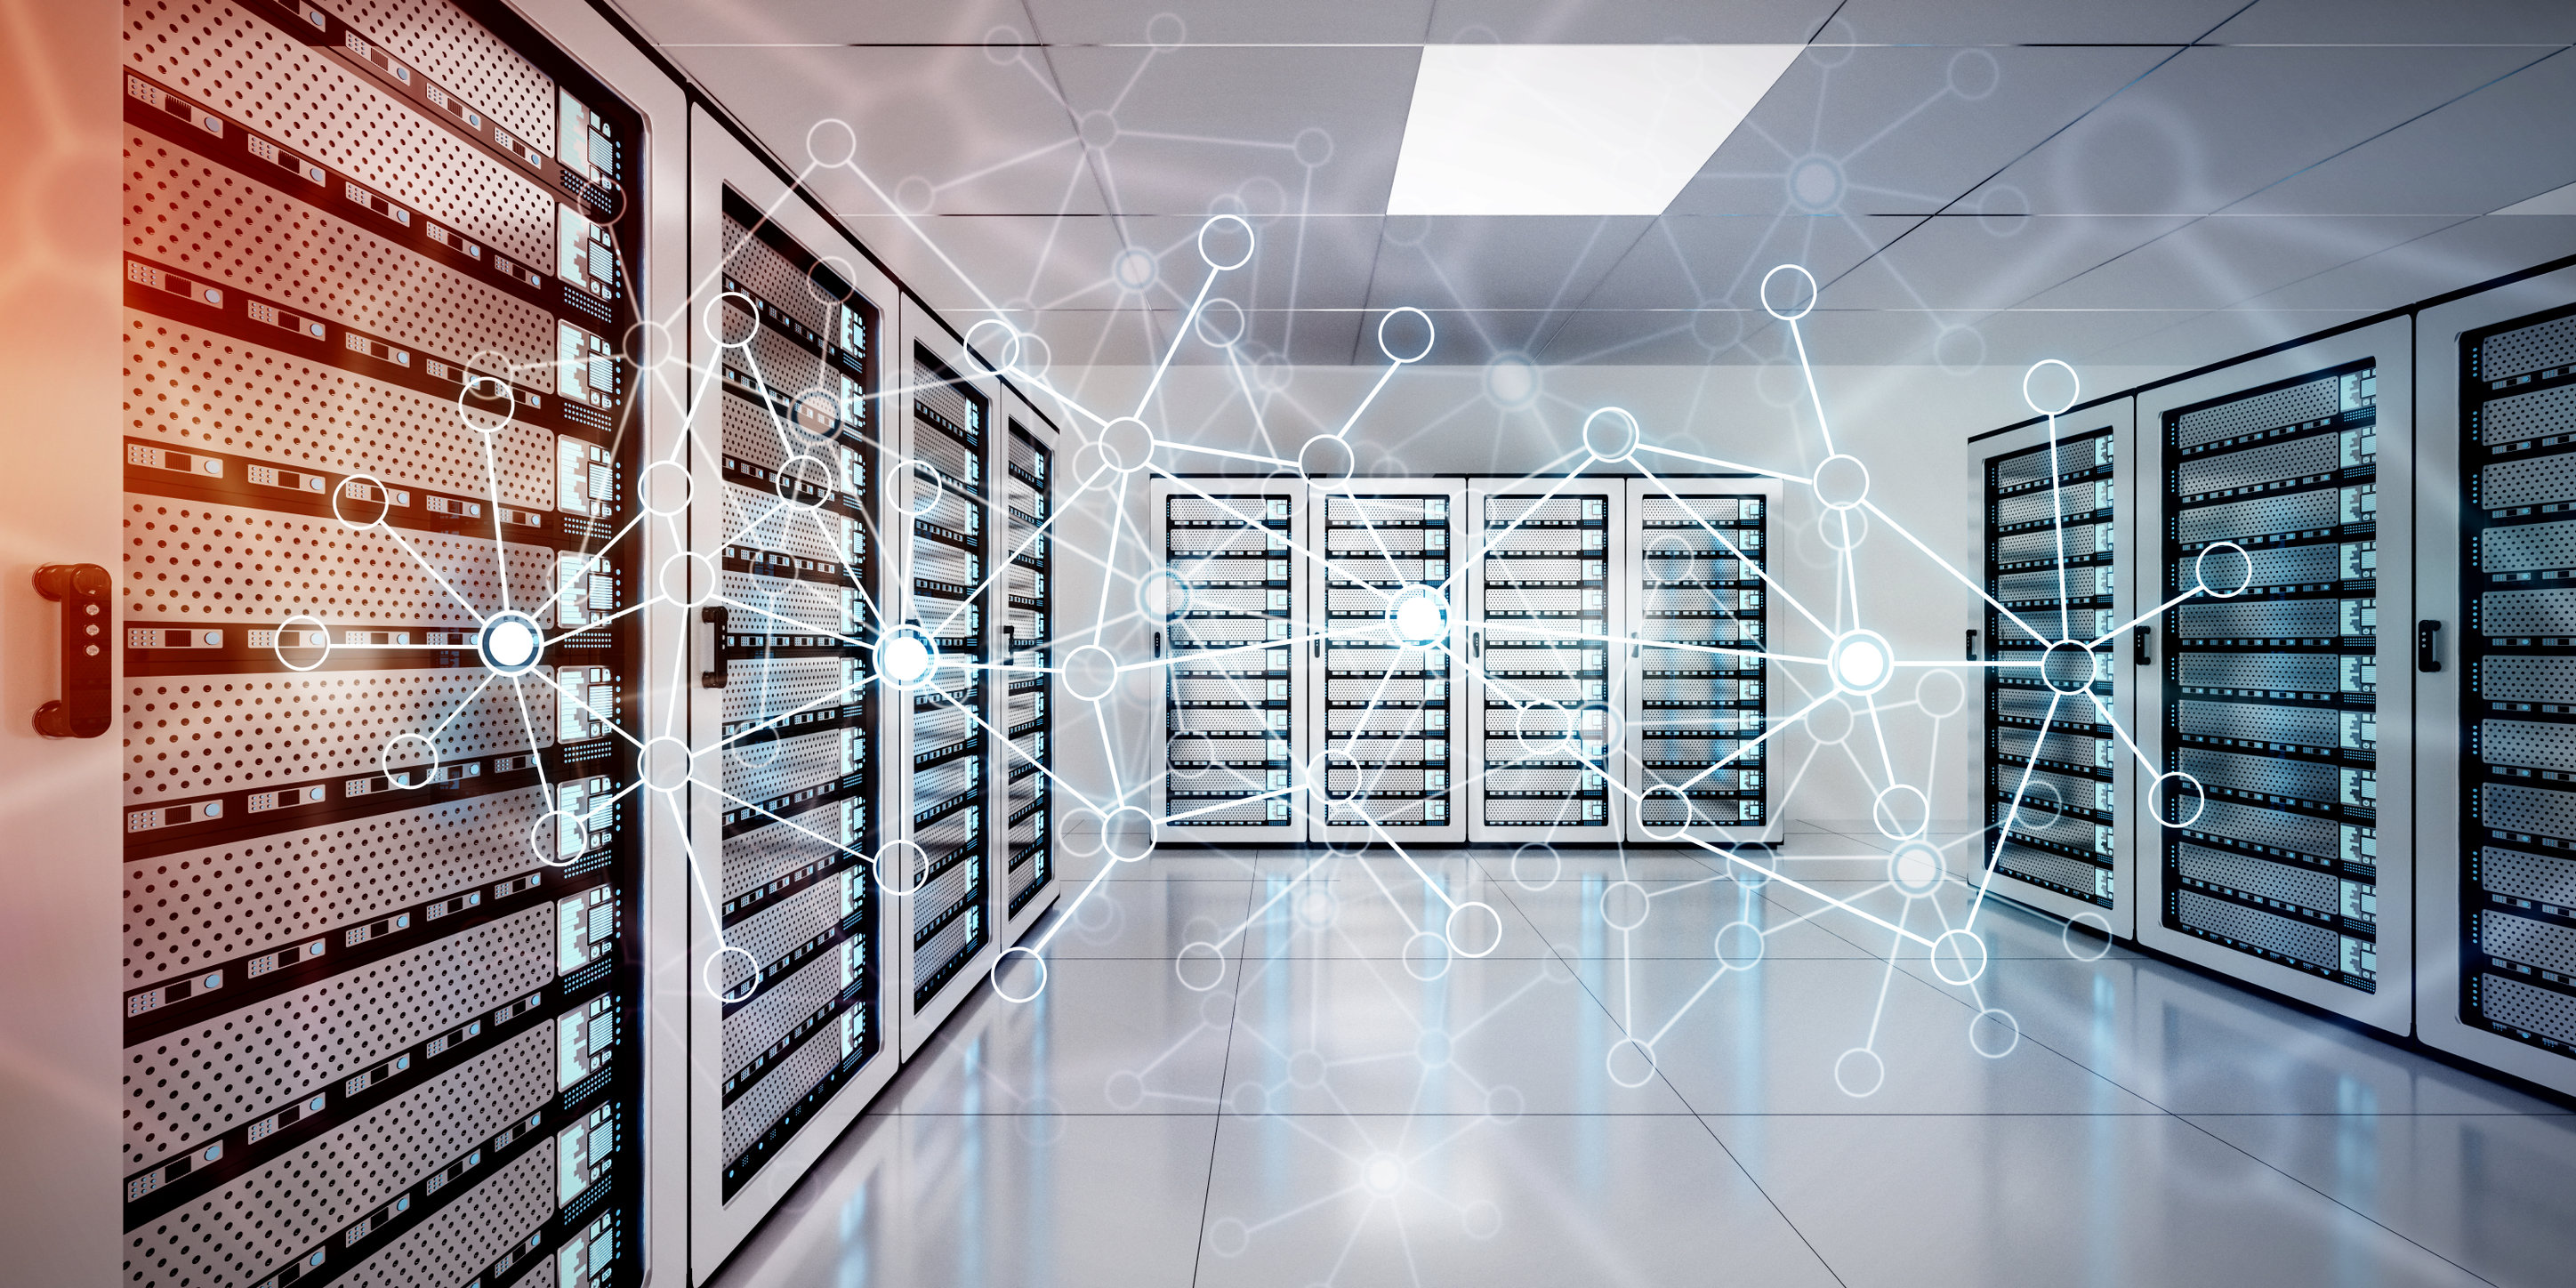 Improve security, performance and operational efficiency in the data centre